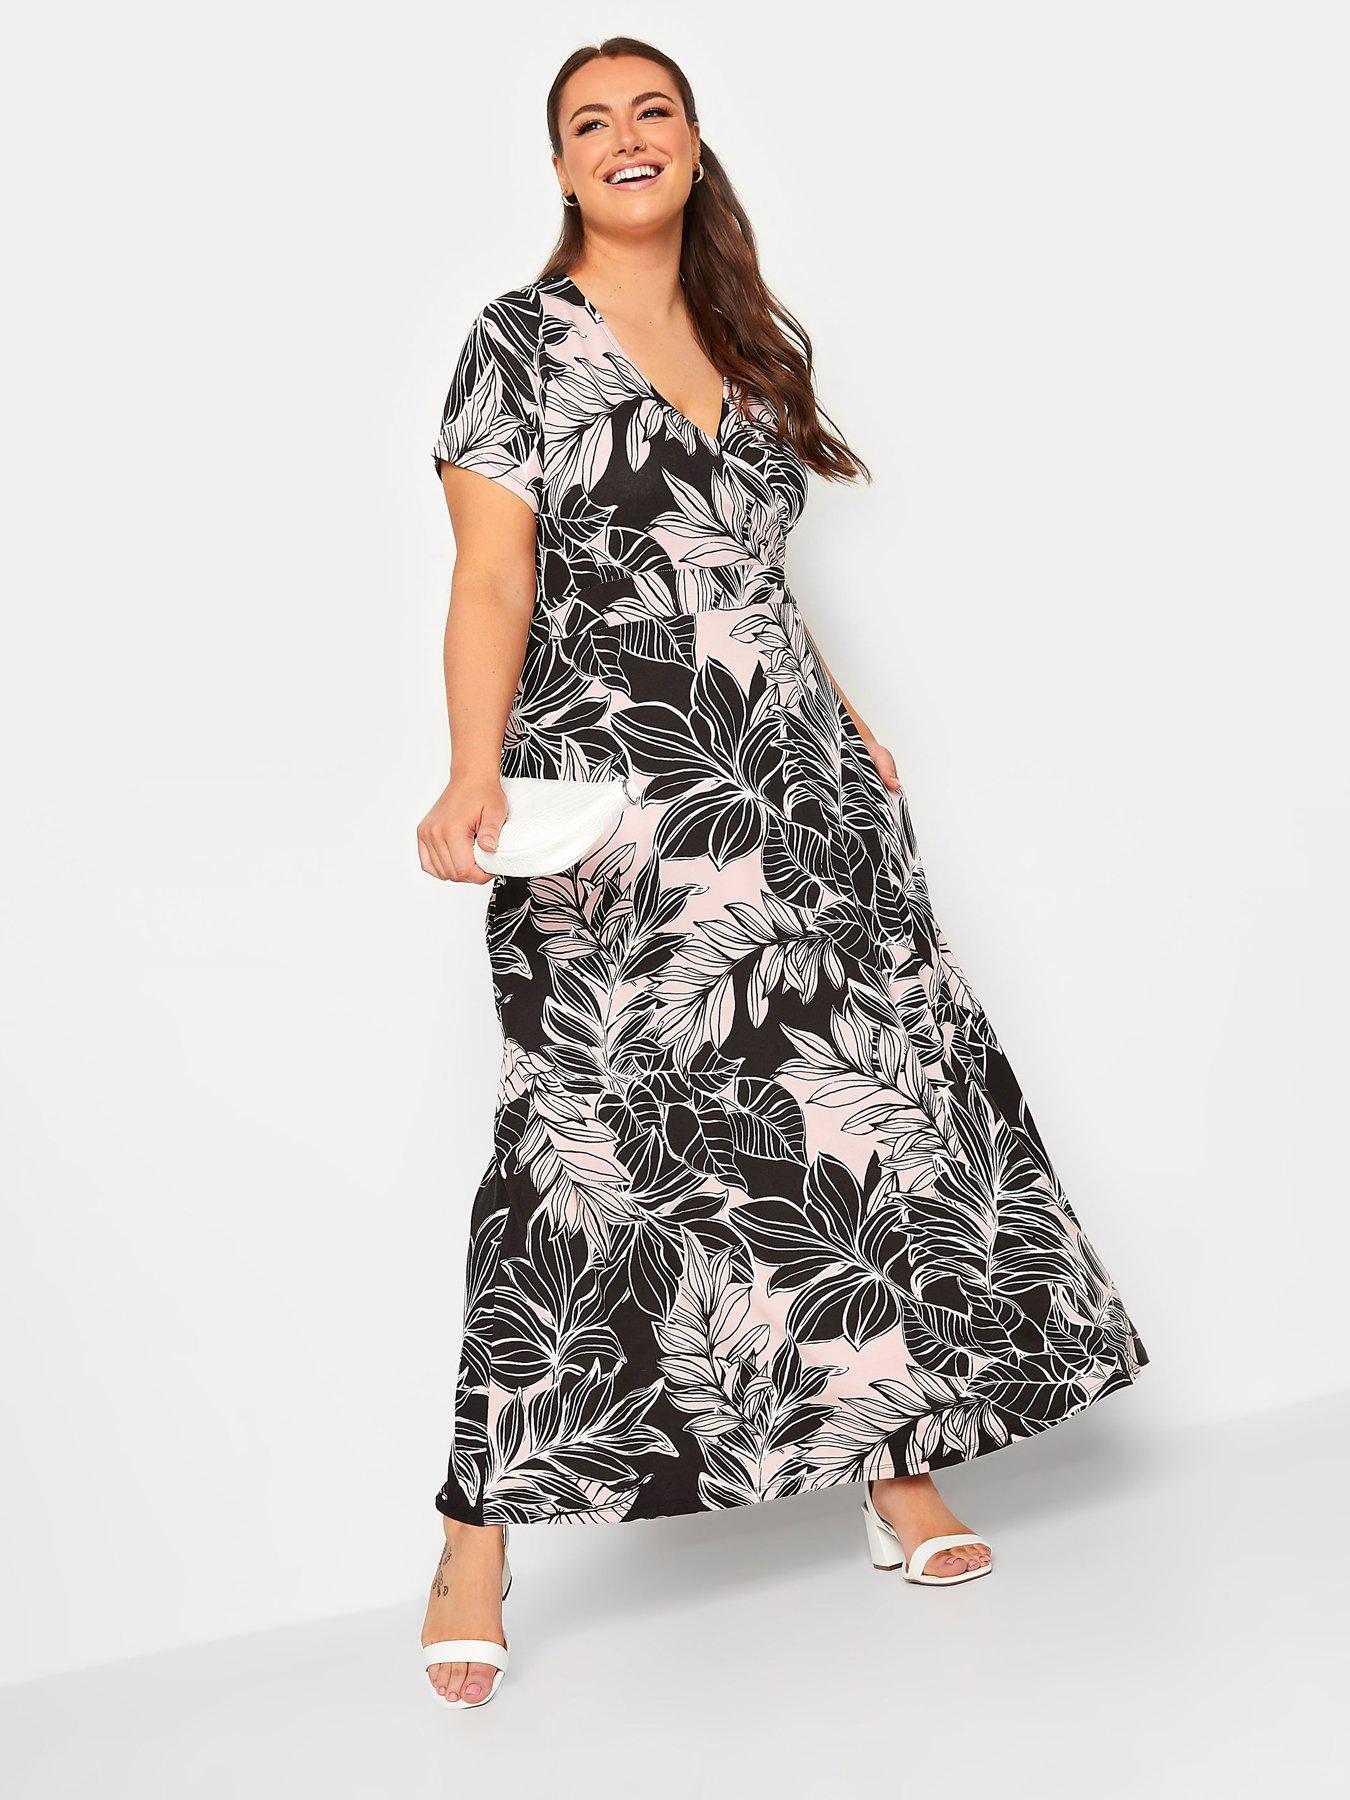 Plus Size Lace Up Floral Chiffon And Flare Pants Outfit [42% OFF]